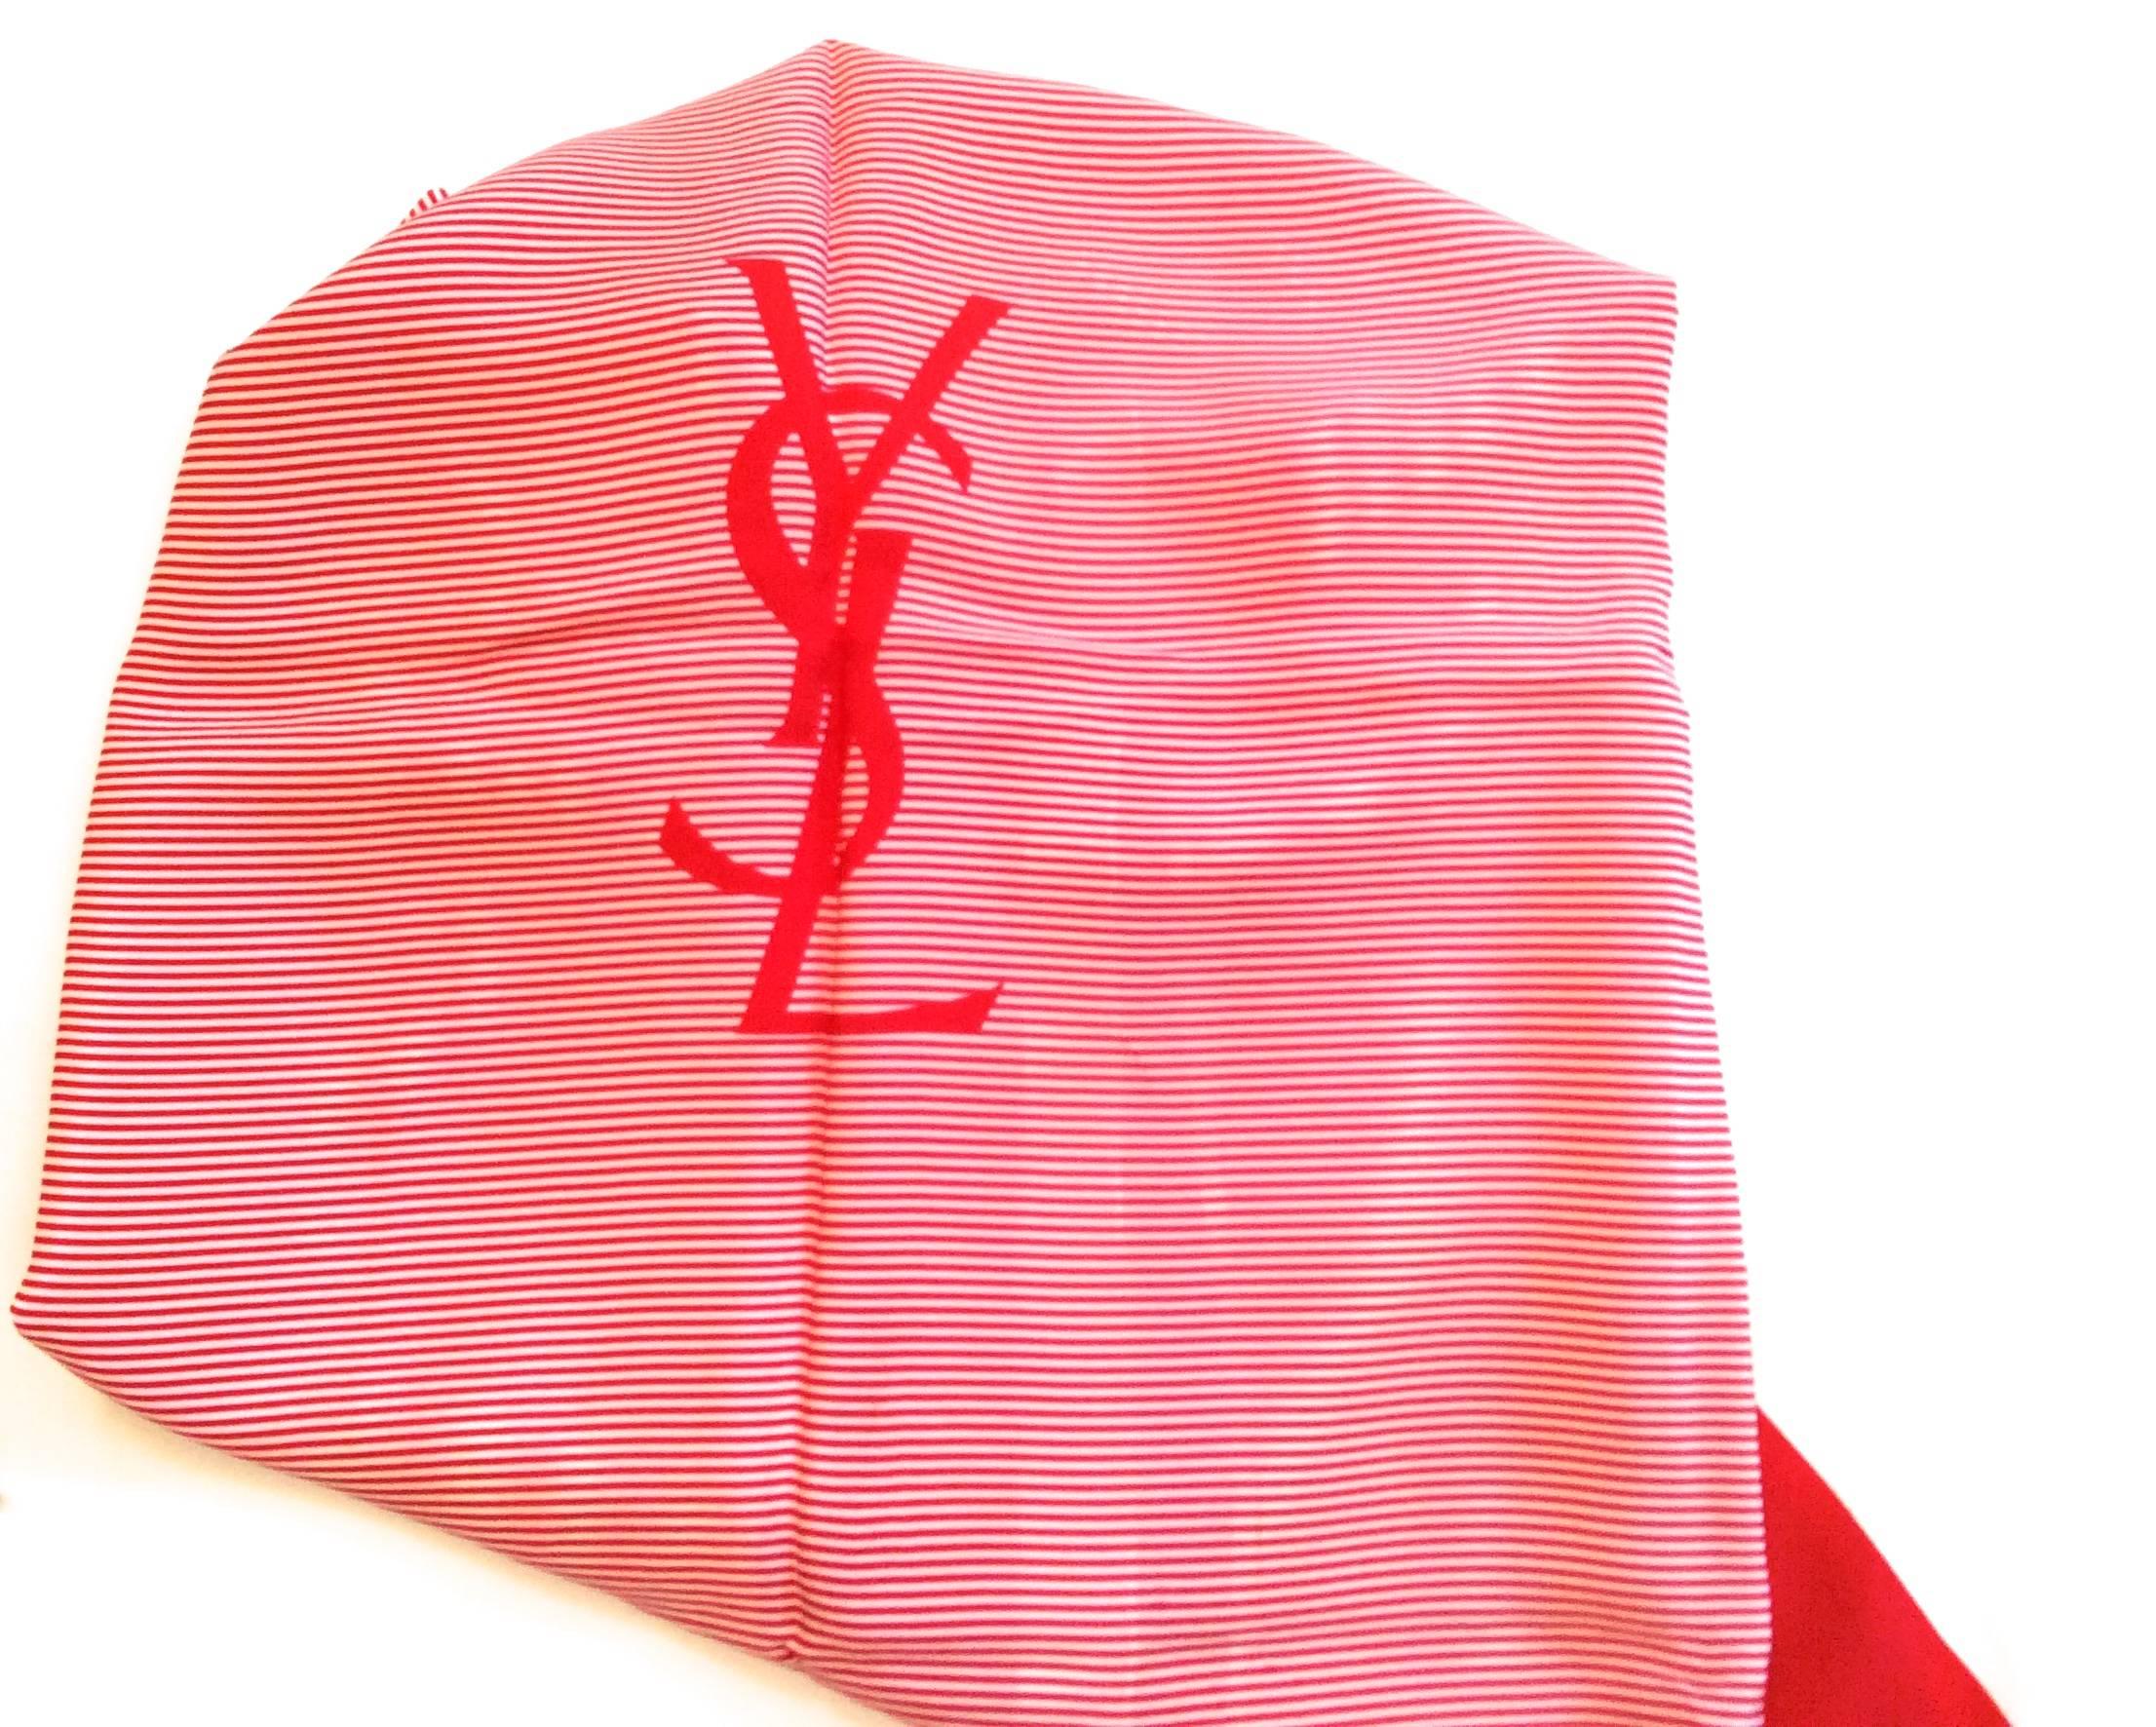 Presented here is a beautiful 1970's scarf in mint condition. The scarf measures 34 inches by 34 inches. It is a square. The giant YSL logo is in the center of the scarf. It measures 7 inches down. The outside border of the scarf is a 1 inch creamy